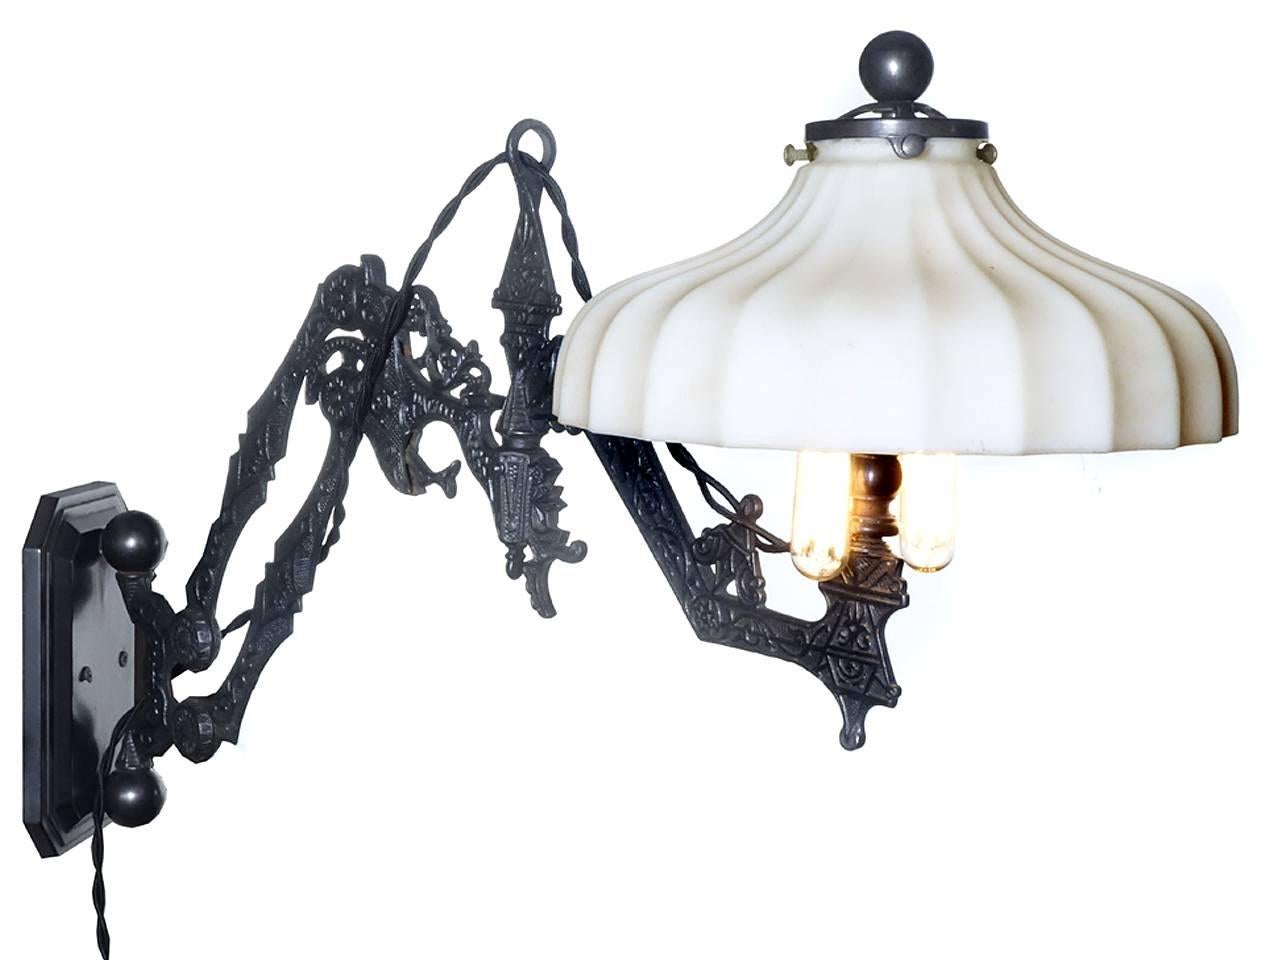 American Ornate Articulated Arm Wall Lamp